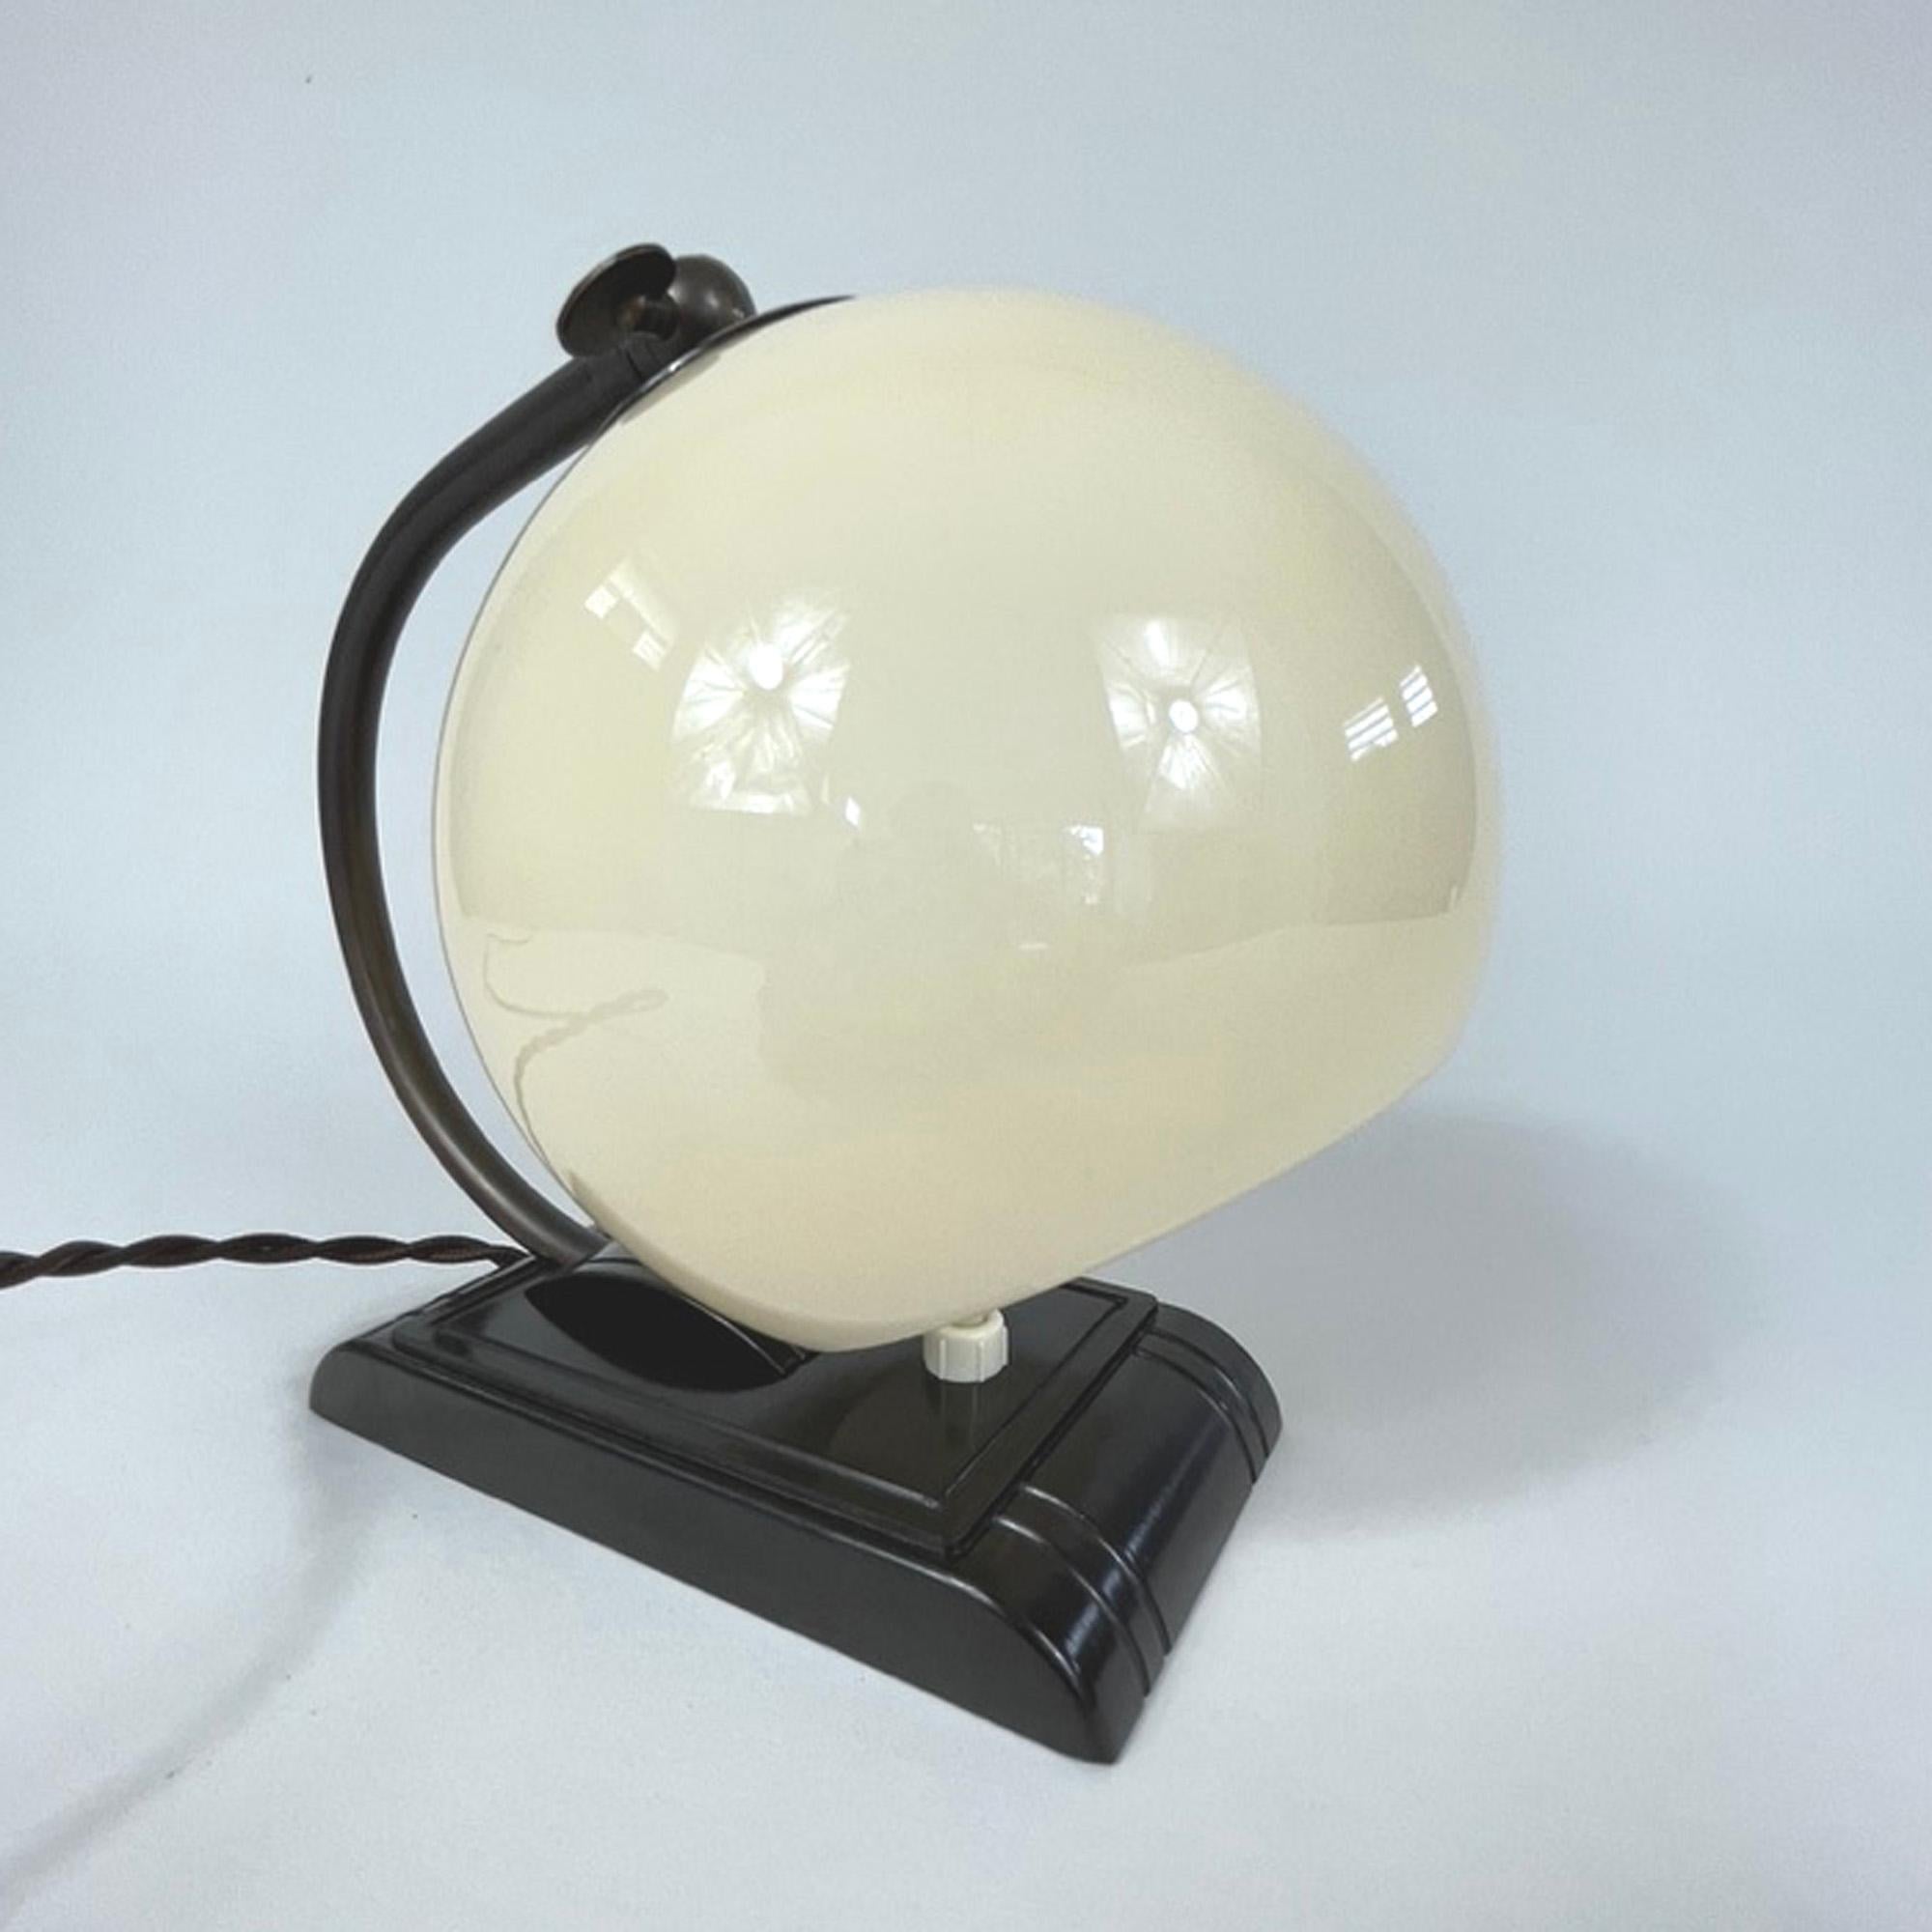 Art Deco Streamline Design Bakelite and Opaline Table Lamp, 1920s to 1930s For Sale 4